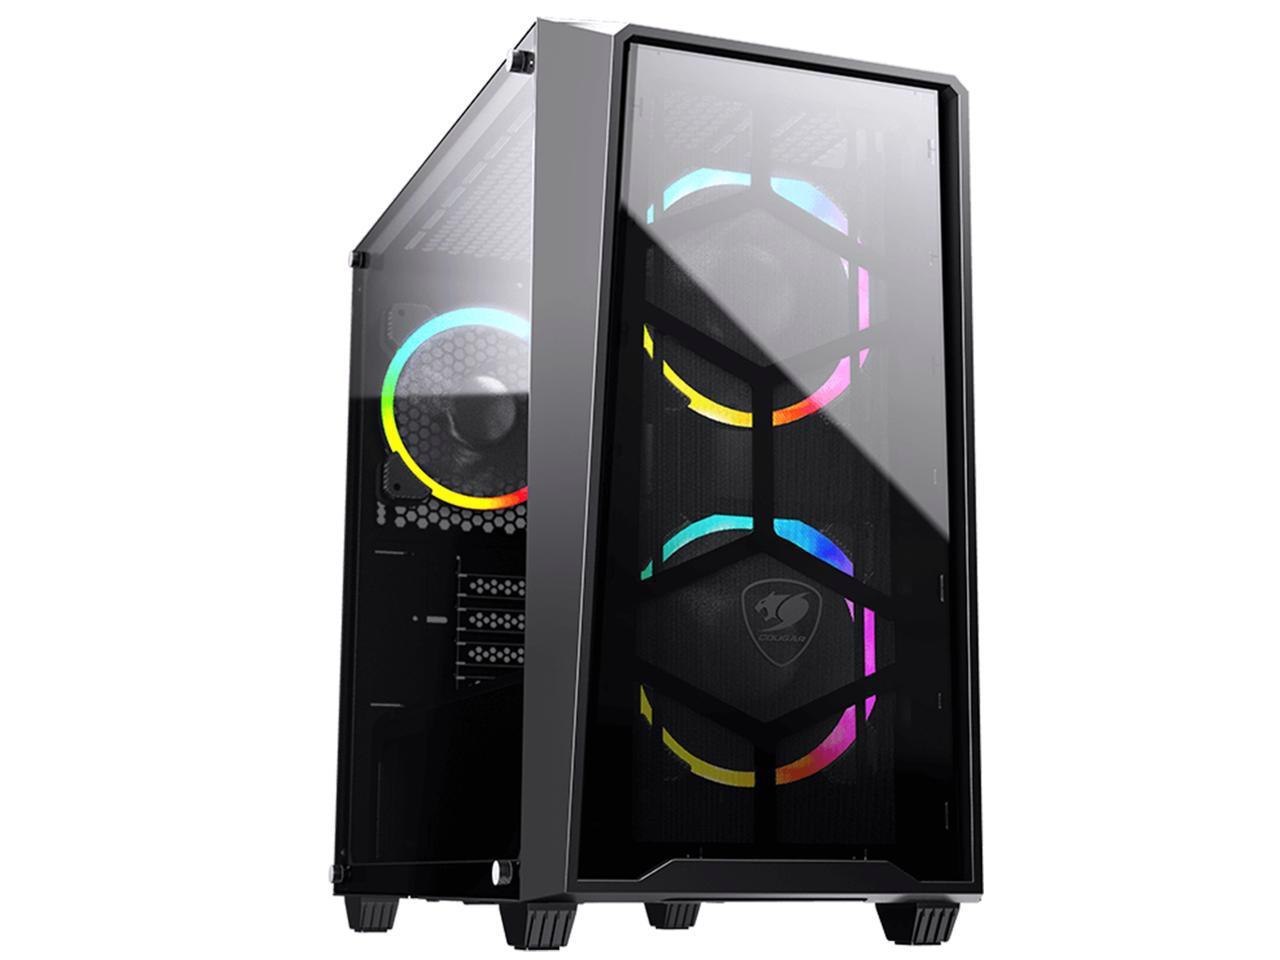 Cougar MG120-G RGB Black Steel / Tempered Glass Micro Atx Mini Tower Compact RGB Mini Tower Case With Tempered Glass Side Window